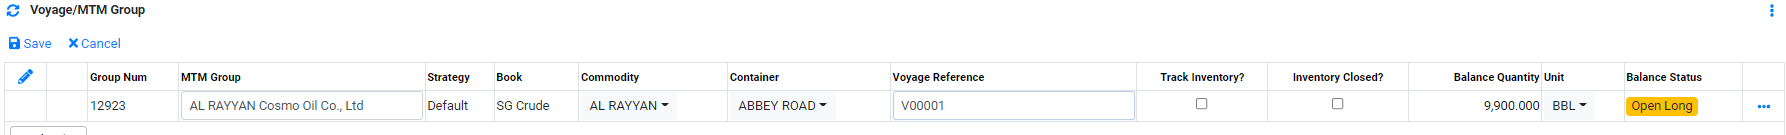 Operations Vessel Voyage Ref Update.png